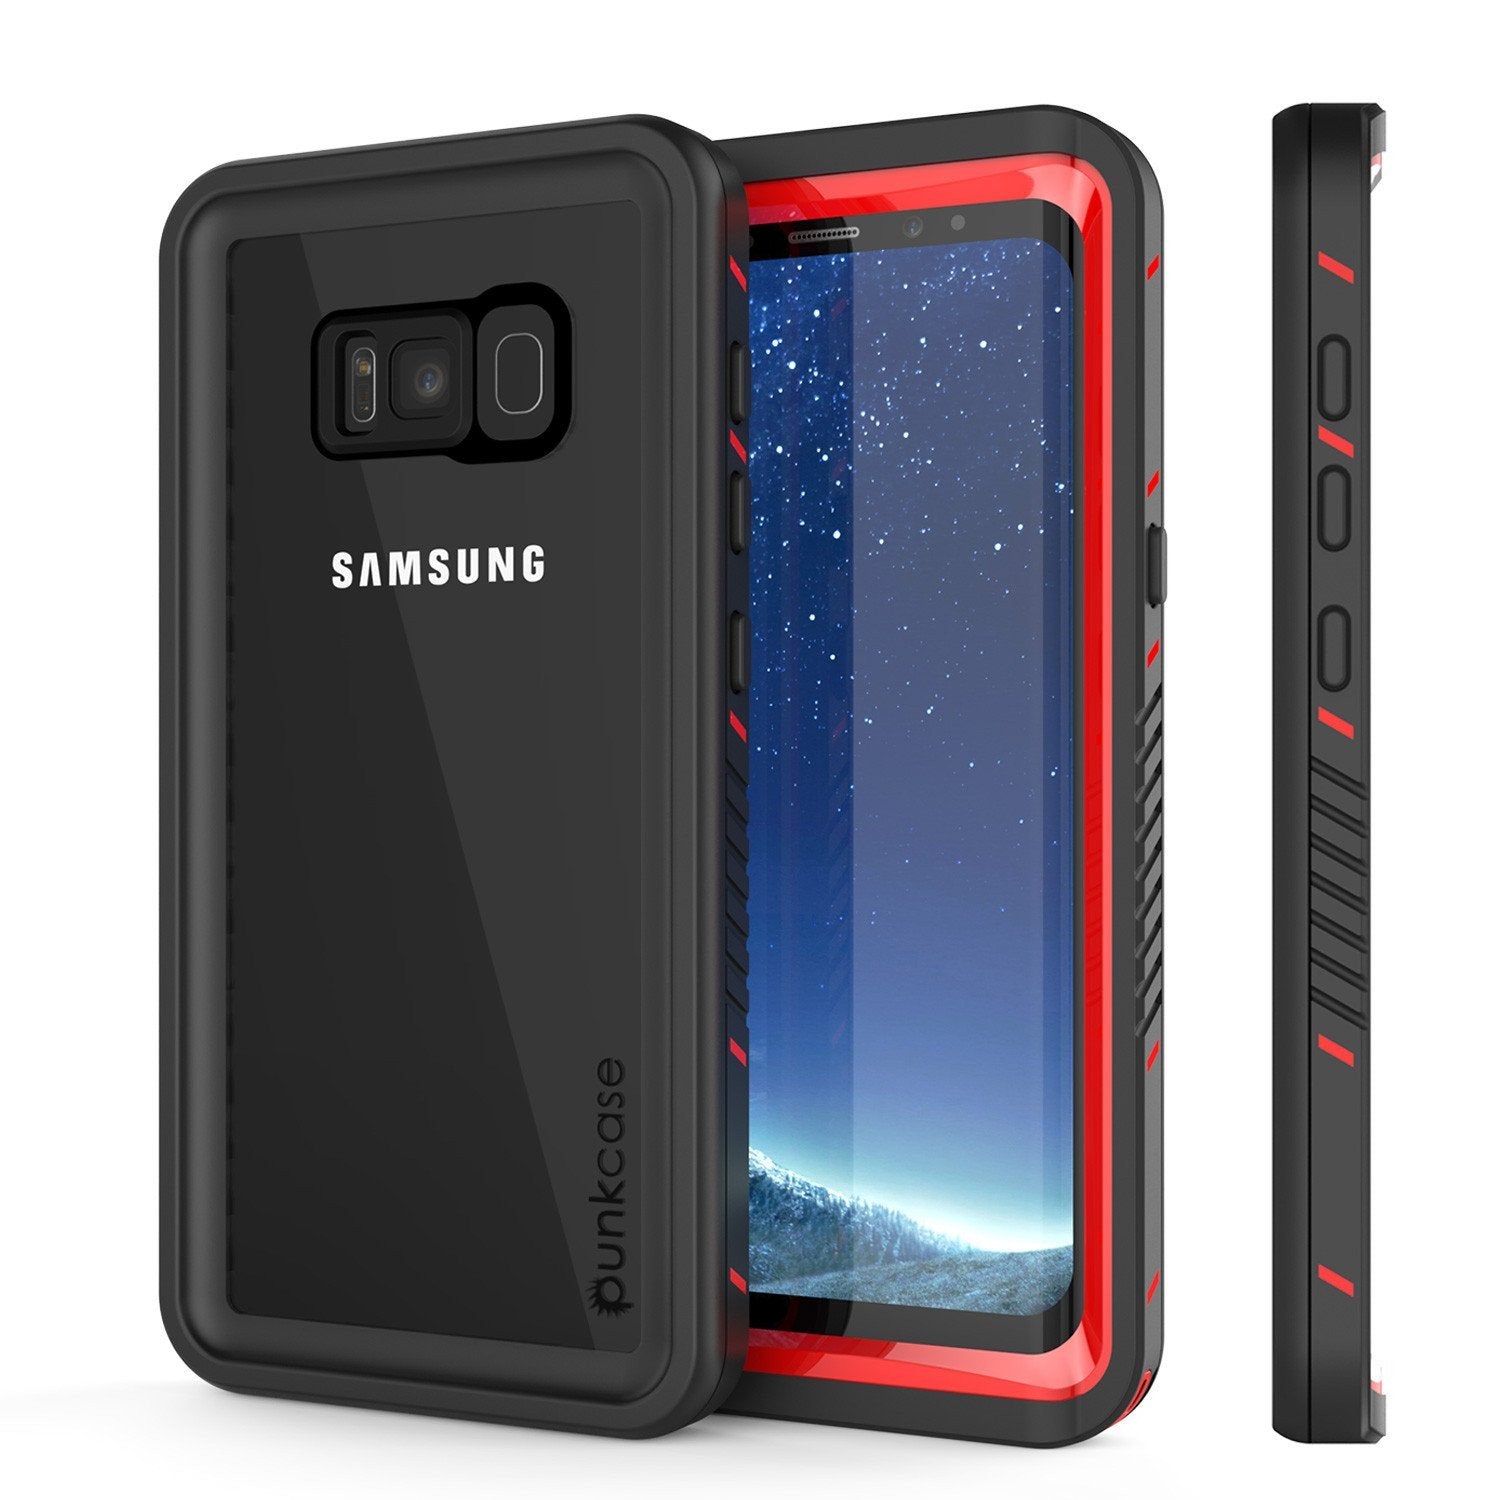 Galaxy S8 PLUS Waterproof Case, Punkcase [Extreme Series] [Slim Fit] [IP68 Certified] [Shockproof] [Snowproof] [Dirproof] Armor Cover W/ Built In Screen Protector for Samsung Galaxy S8+ [Red]